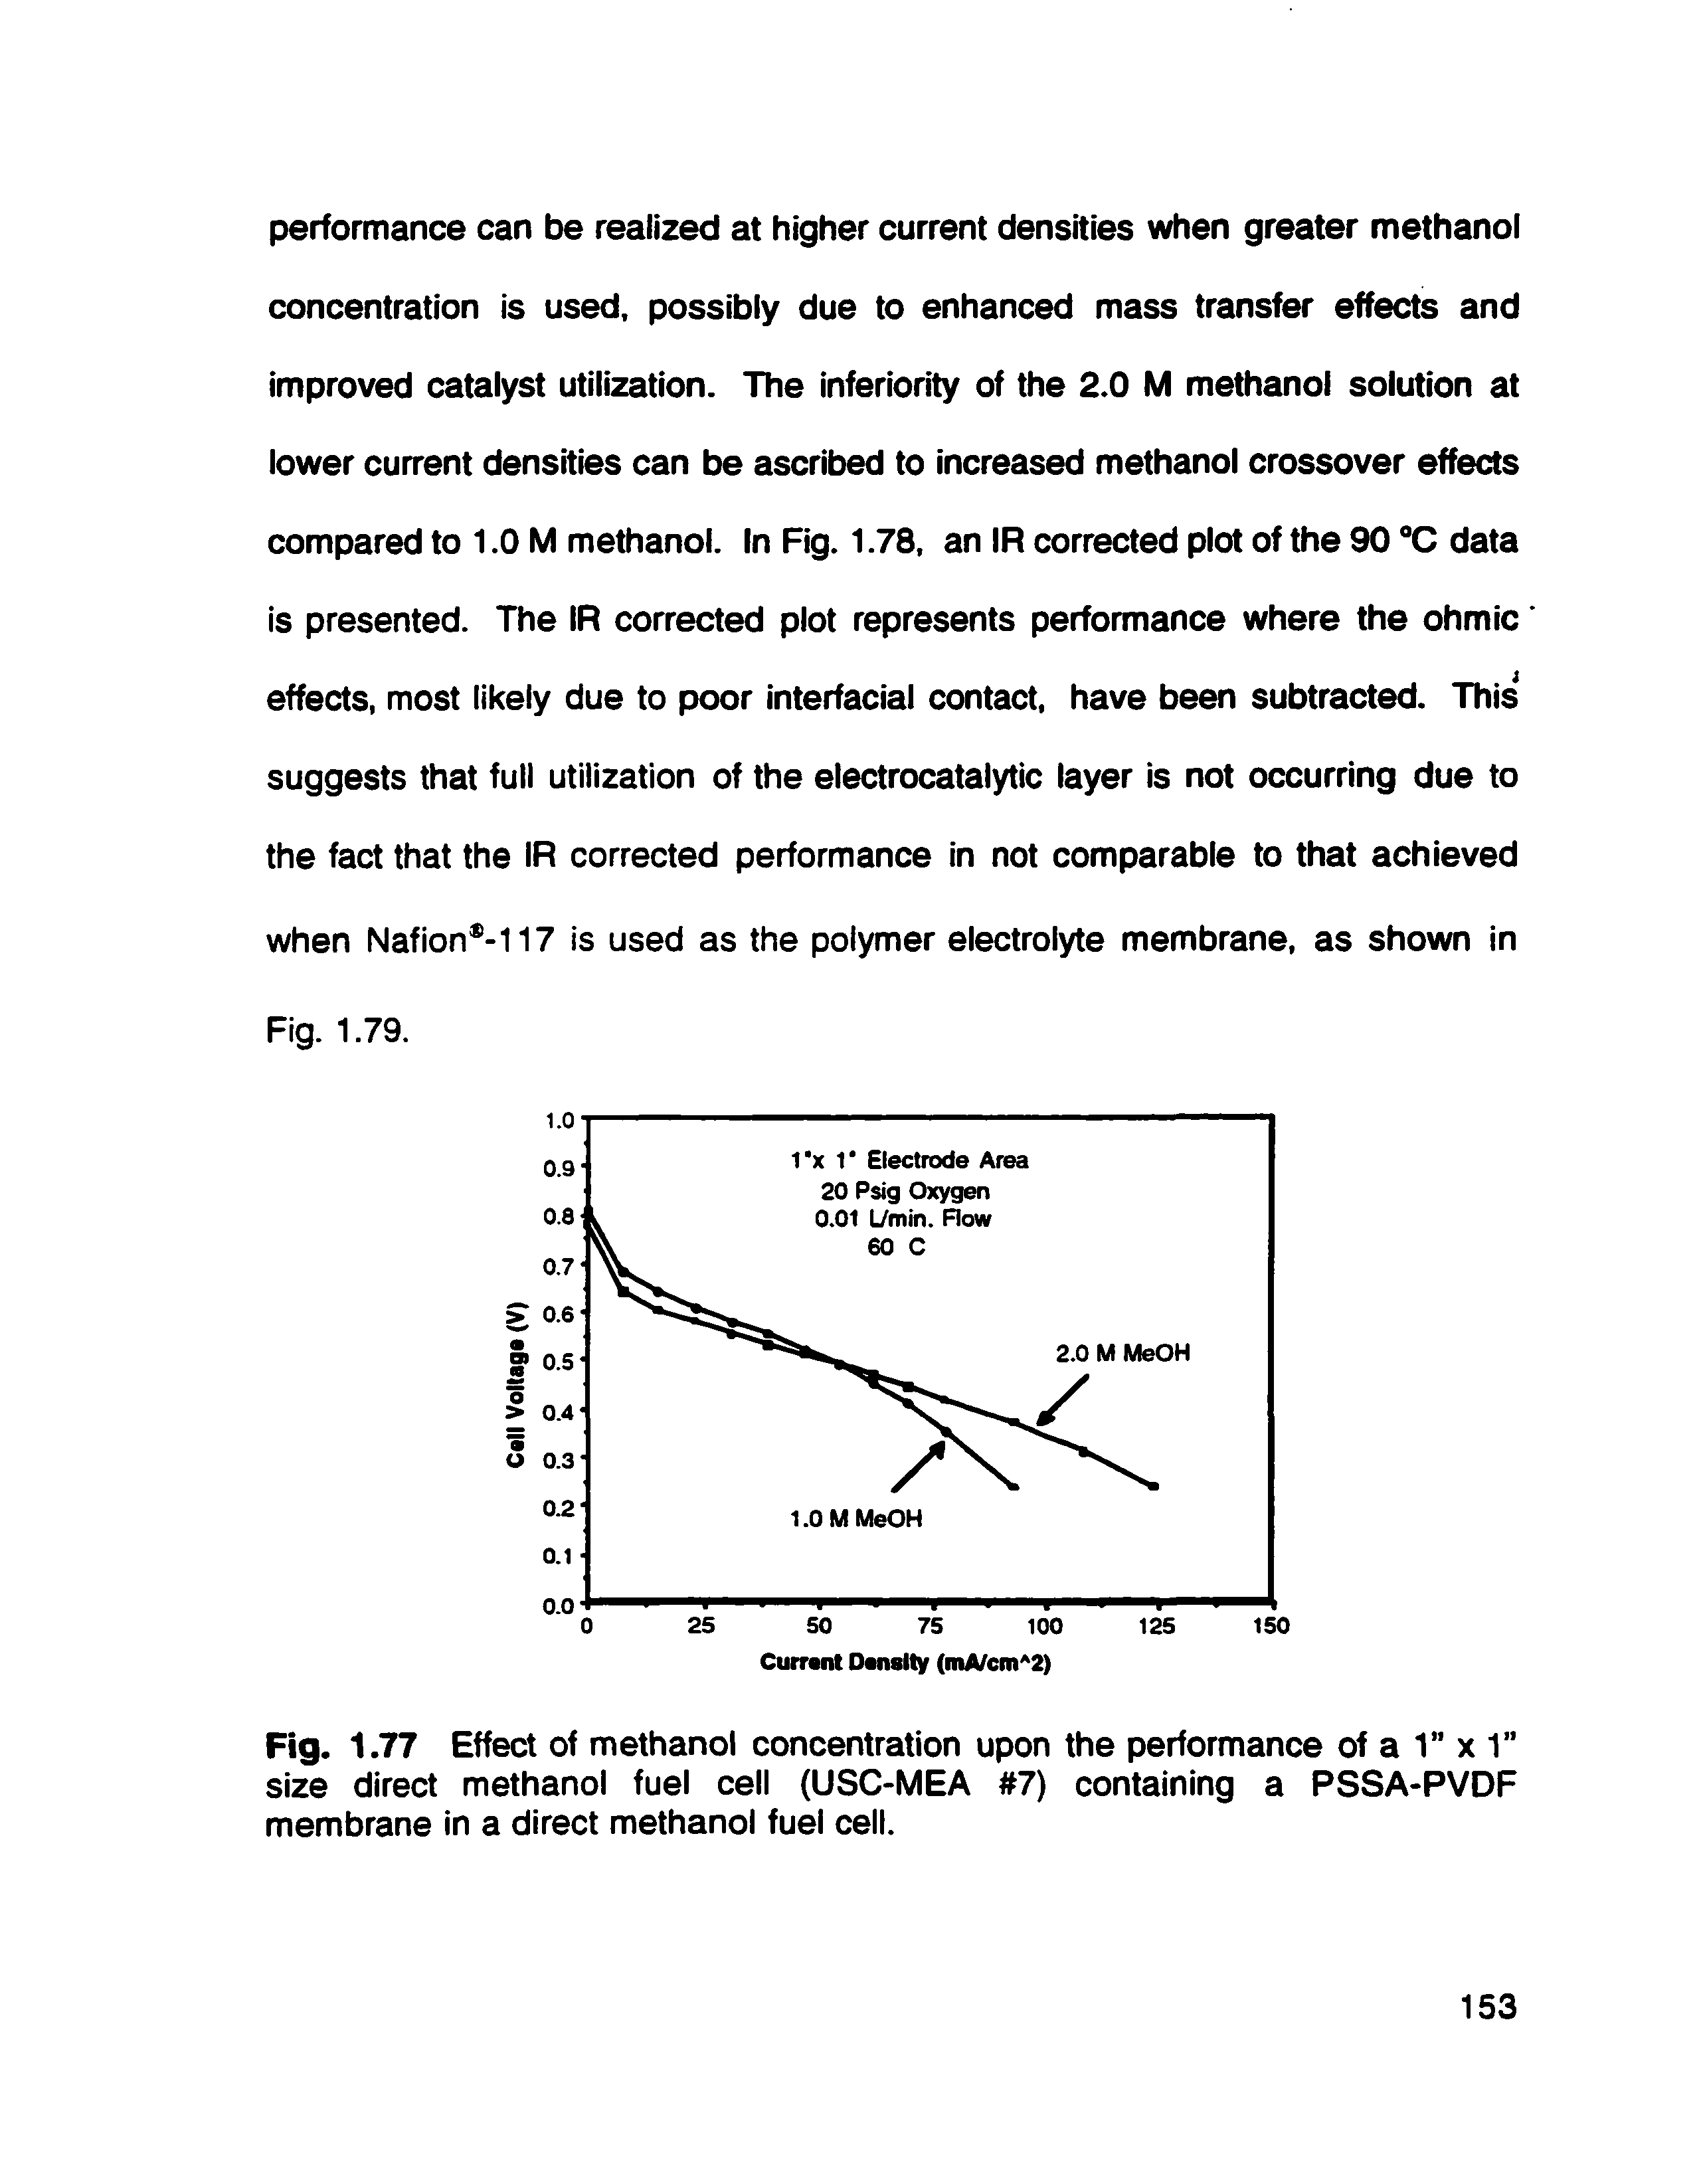 Fig. 1.77 Effect of methanol concentration upon the performance of a 1 x 1 size direct methanol fuel cell (USC-MEA 7) containing a PSSA-PVDF membrane in a direct methanol fuel cell.